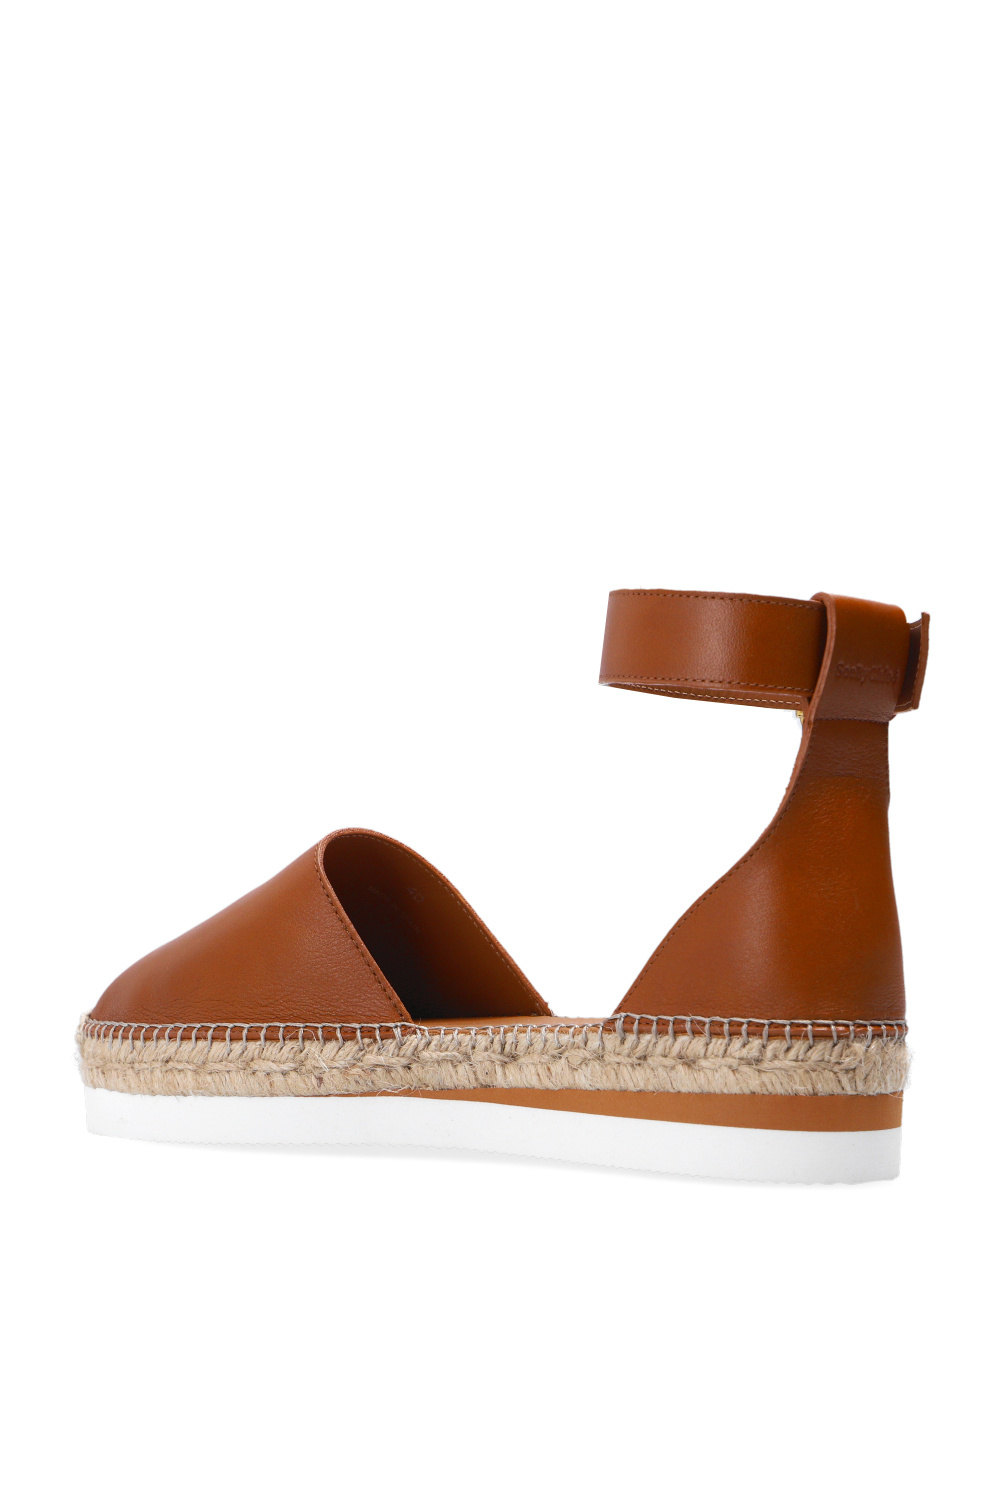 See By Chloe Cut-out espadrilles